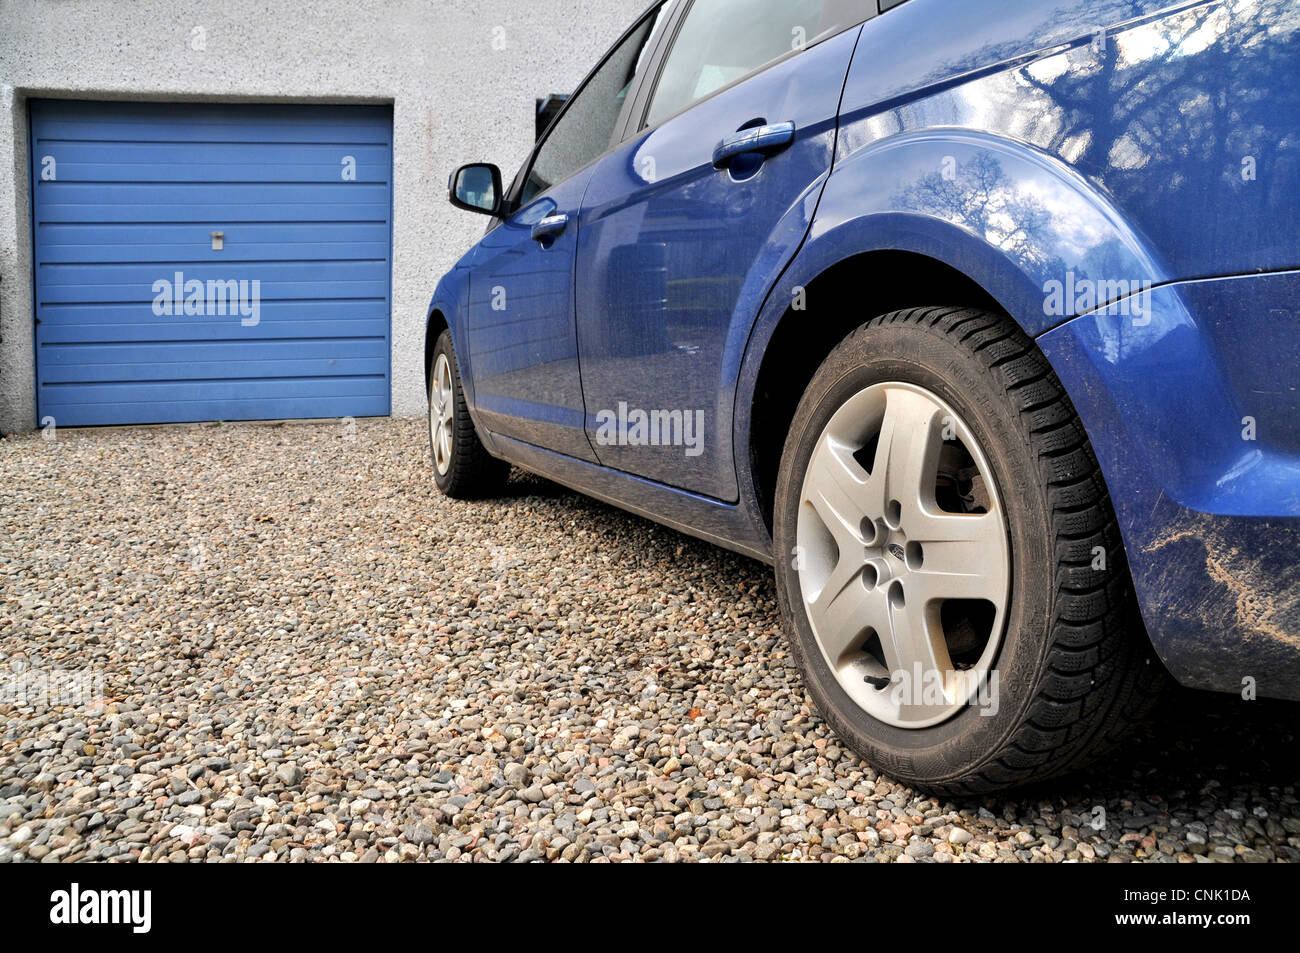 A blue car parked in front of a closed garage door in the driveway of a house. Stock Photo